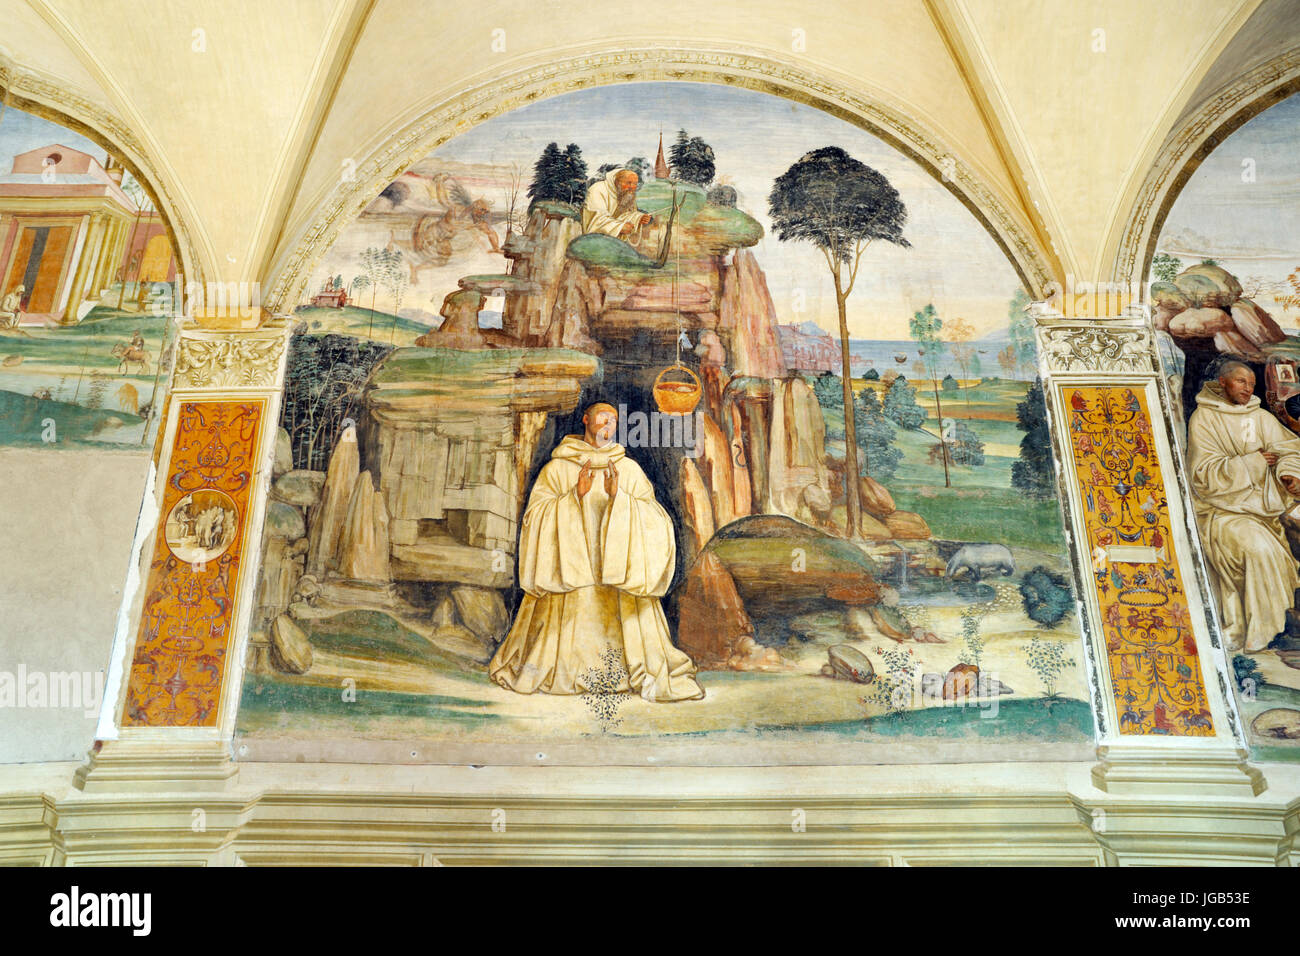 Renaissance frescos, st Benedict life, painting by Il Sodoma, Chiostro Grande (Great Cloister), Abbey of Monte Oliveto Maggiore, Tuscany, Italy Stock Photo